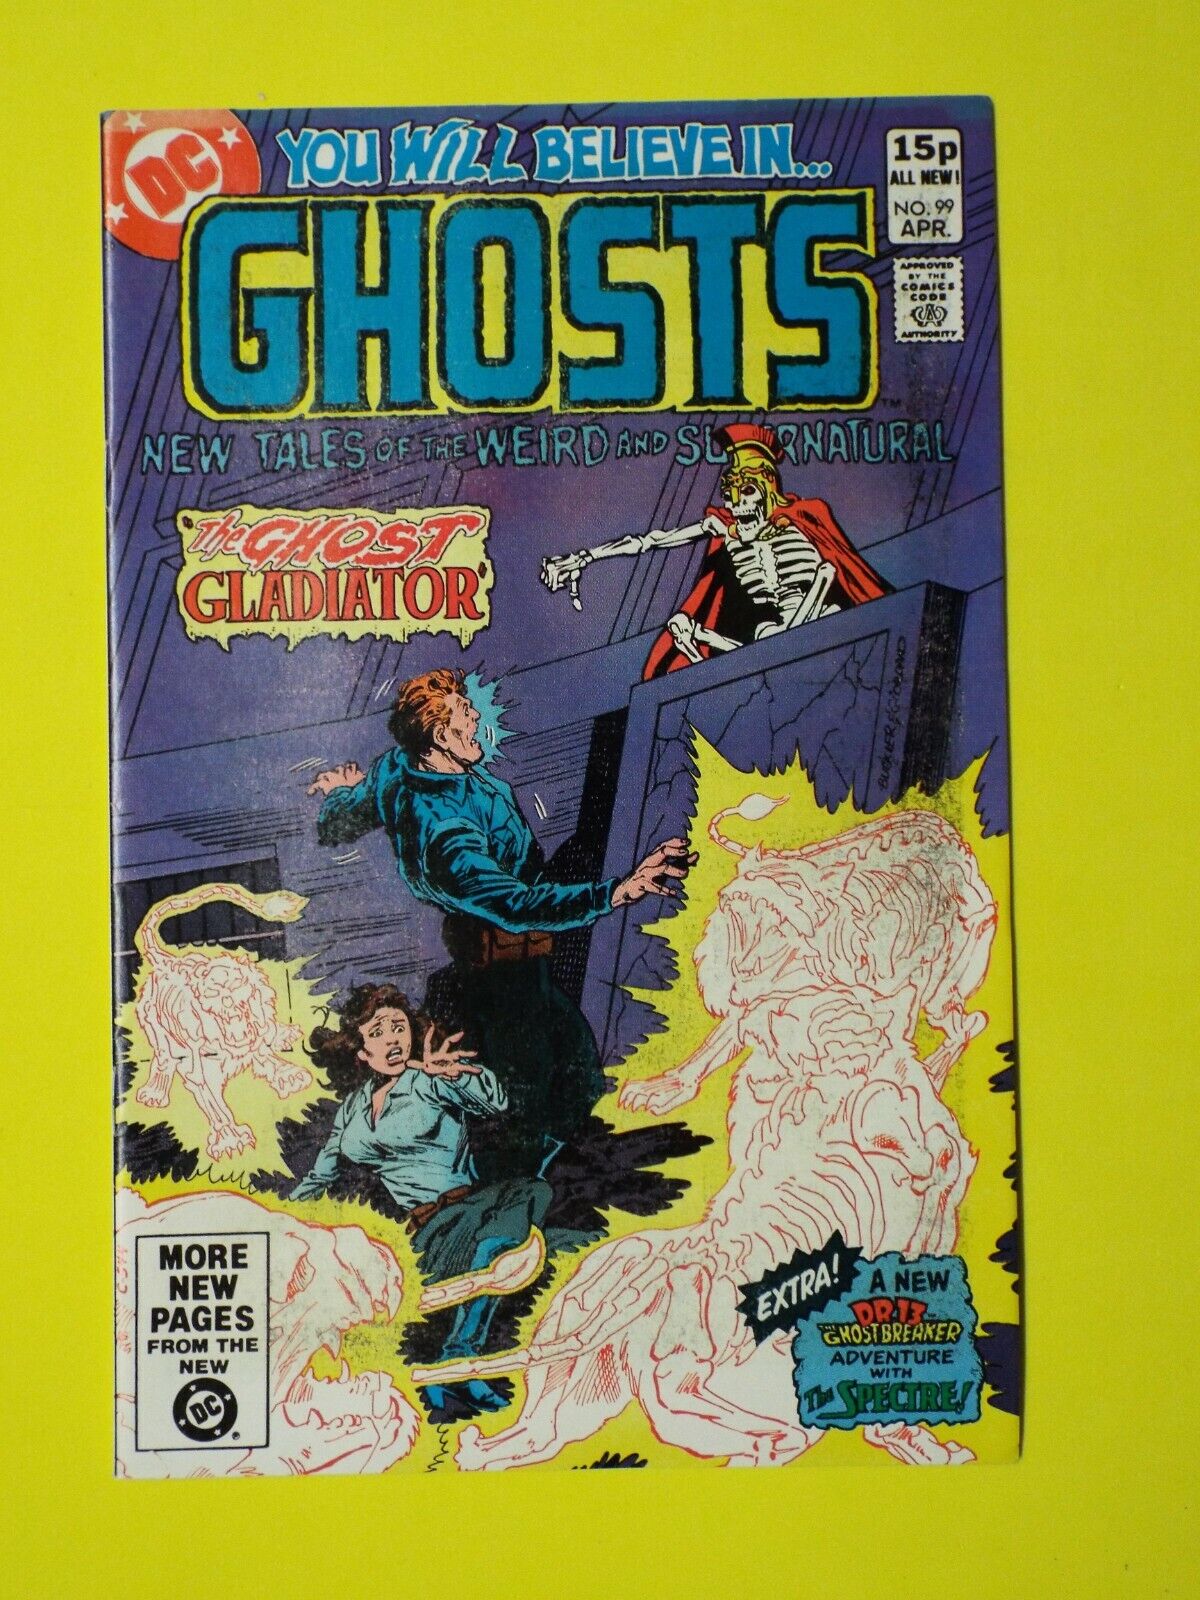 DC Comics Ghosts issue #99 UK price cover